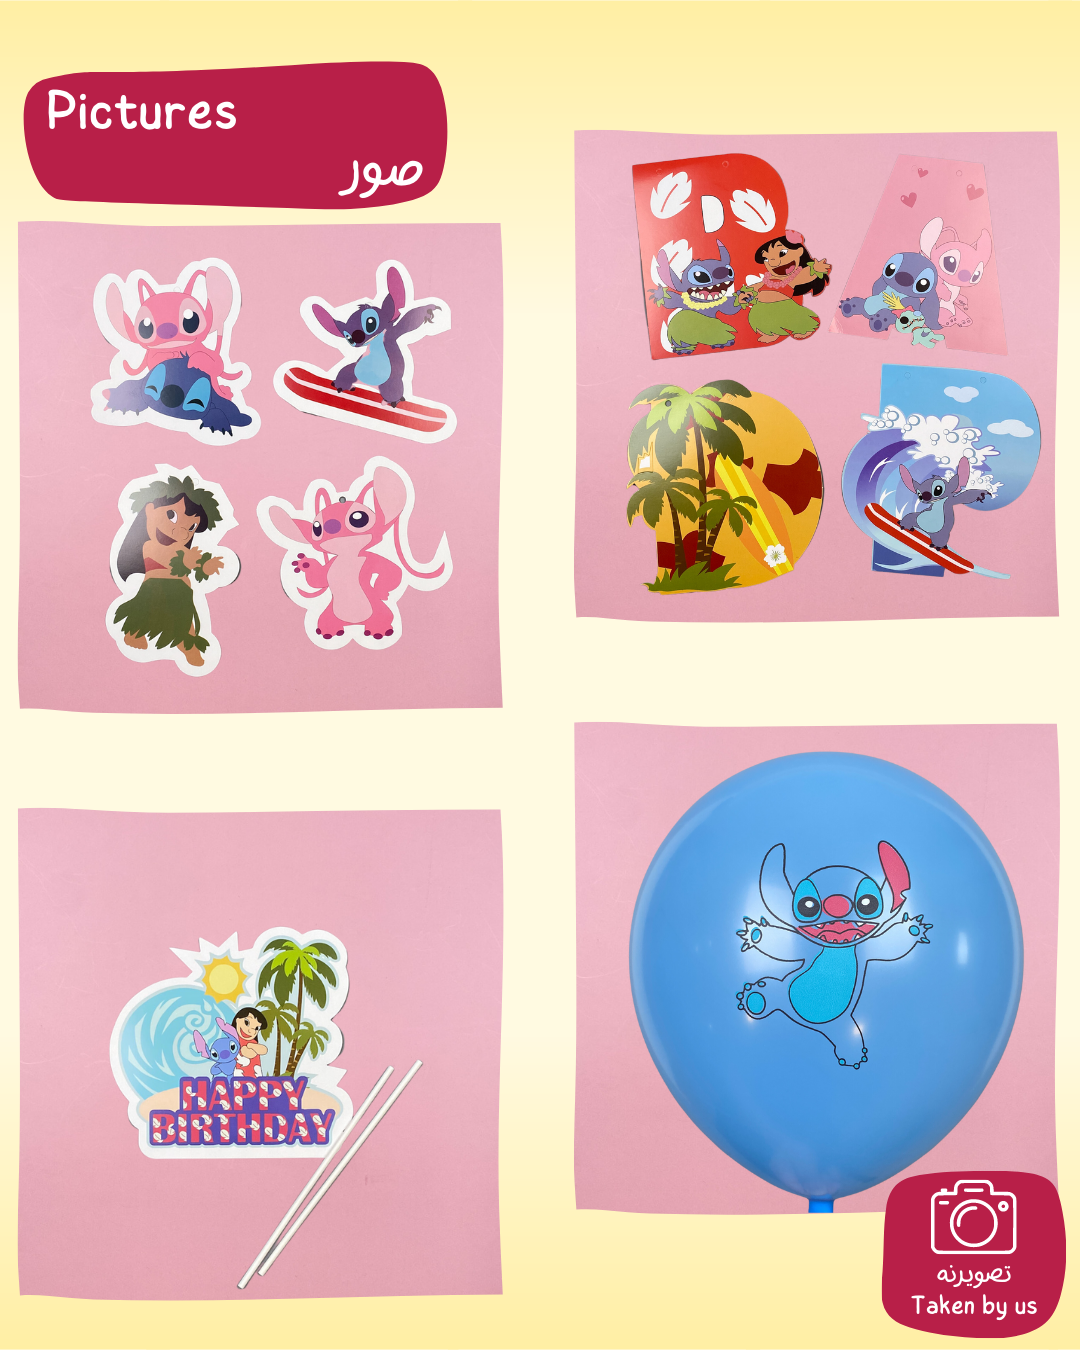 Stitch Birthday Decorations, Include Banner, Cake Topper, Balloons, Hanging  Swirls for Stitch Party Decorations price in Saudi Arabia,  Saudi  Arabia